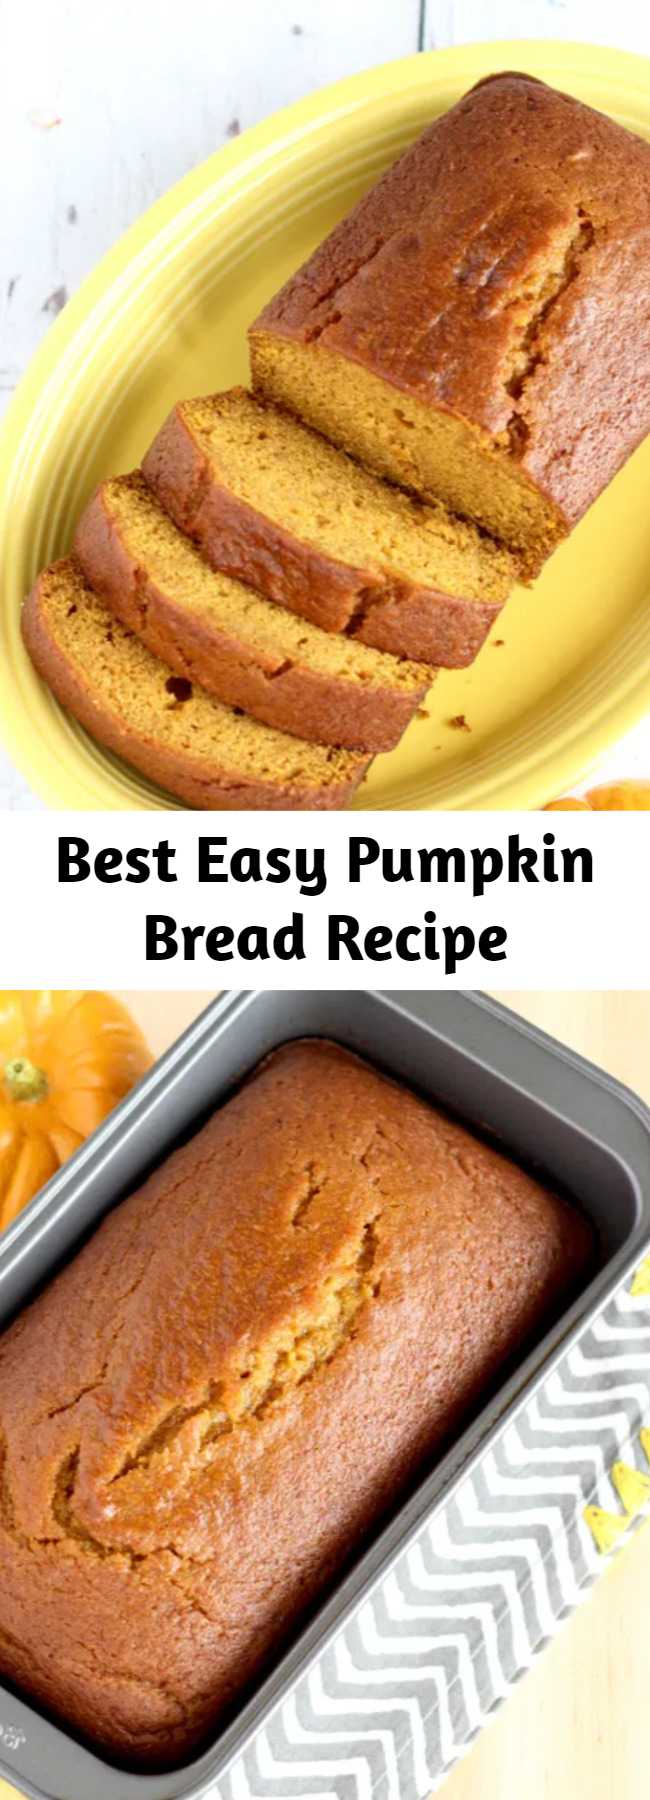 Best Easy Pumpkin Bread Recipe - Get ready for a little Pumpkin bliss with this World’s Best Pumpkin Bread Recipe! Seriously… it’s even better than Starbucks!  And you can keep it easy using Libby’s Pumpkin from the can!  Or… get wild and crazy and make your own homemade pumpkin puree from your backyard garden pumpkins! The choice is yours!